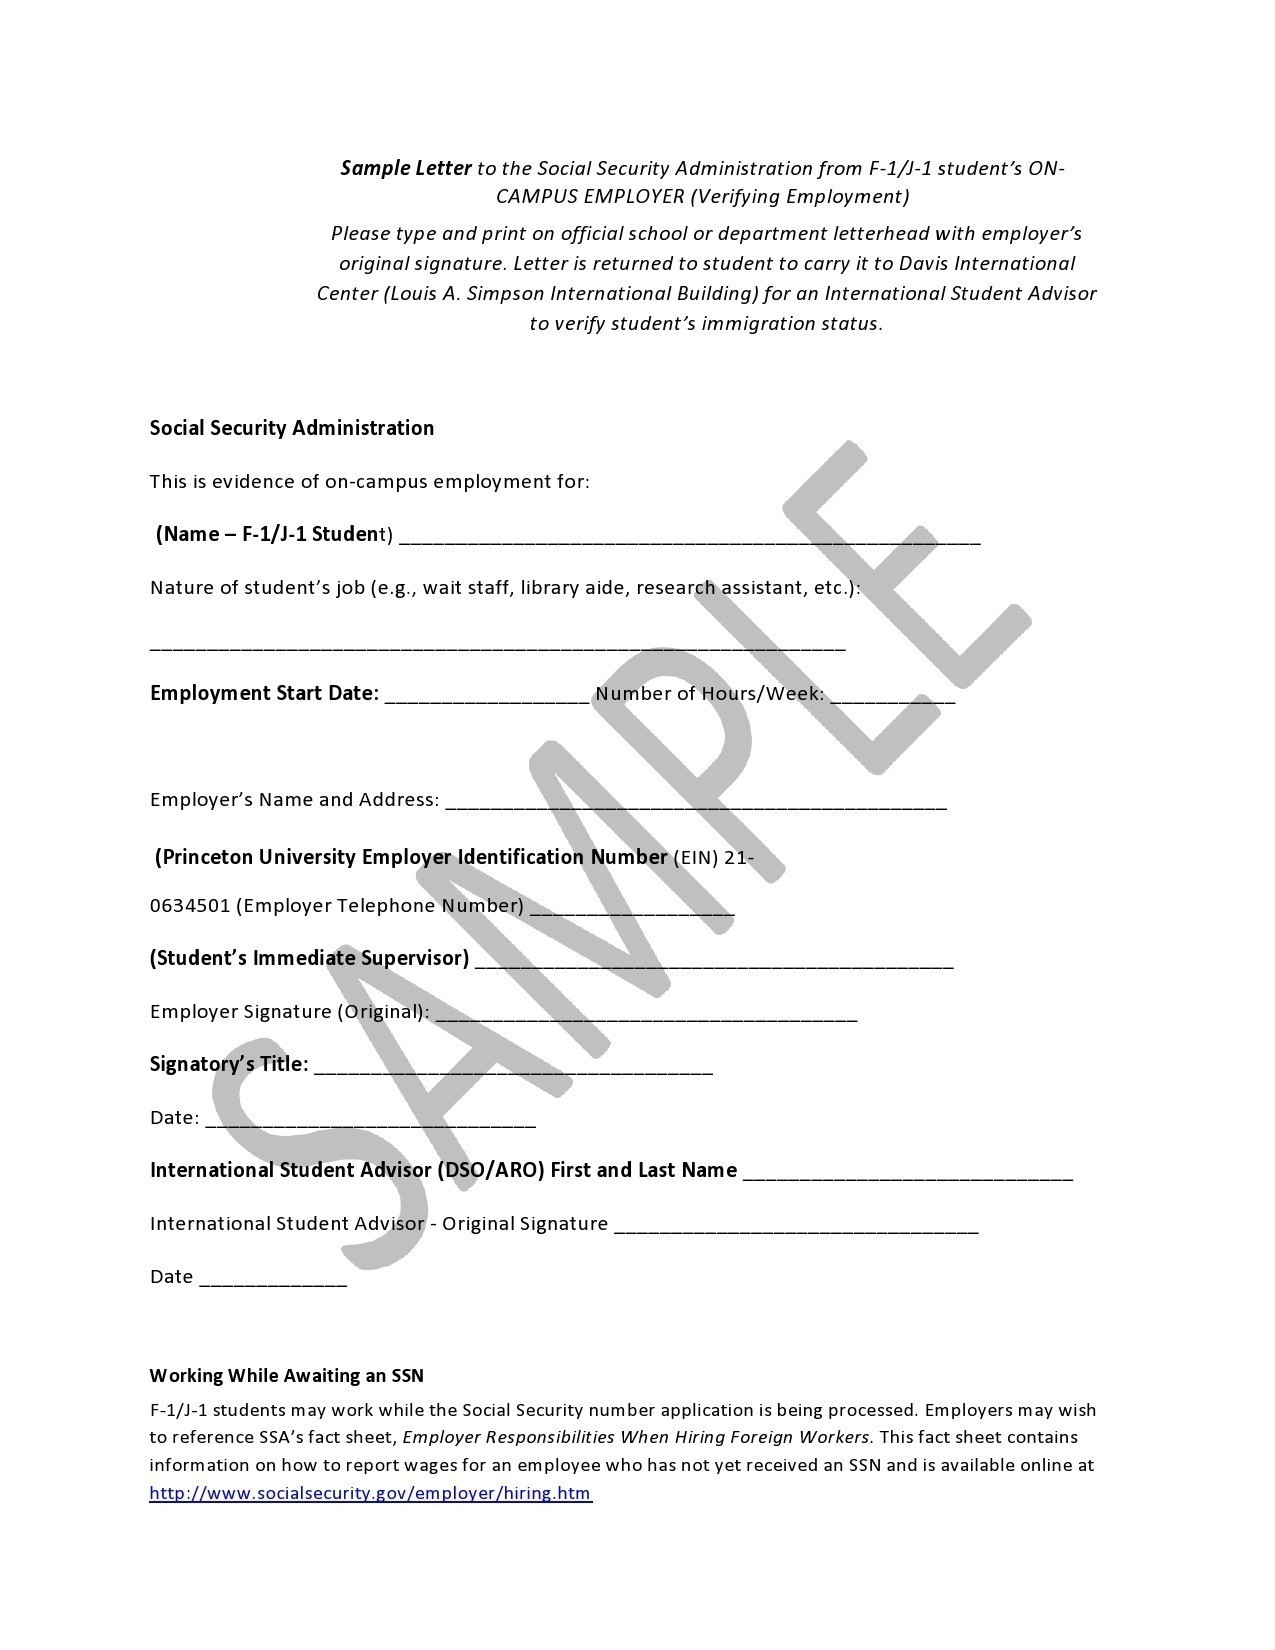 Free social security number verification letter 07